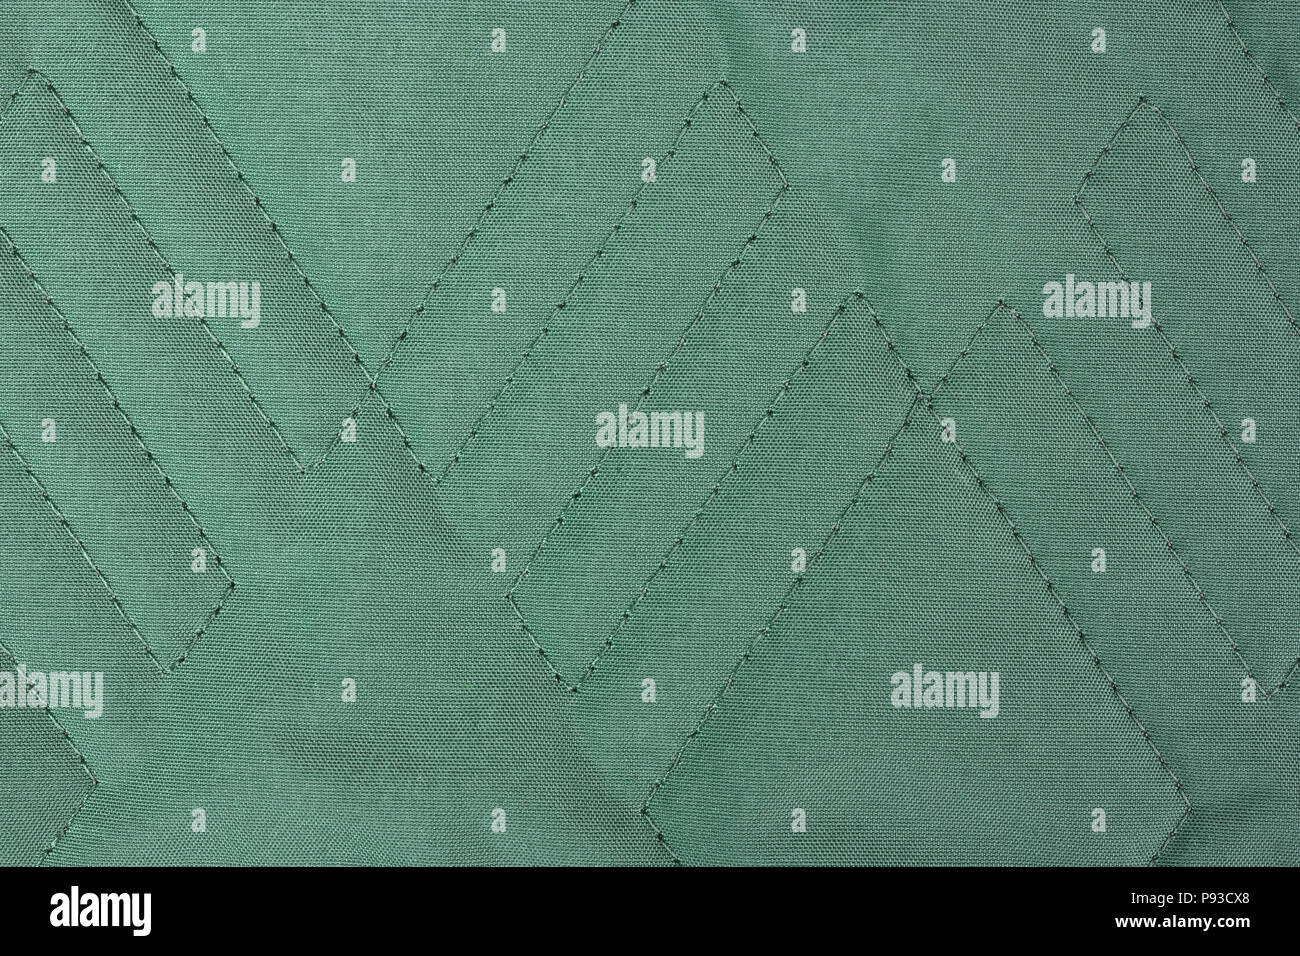 Green quilted fabric texture with geometric pattern Stock Photo